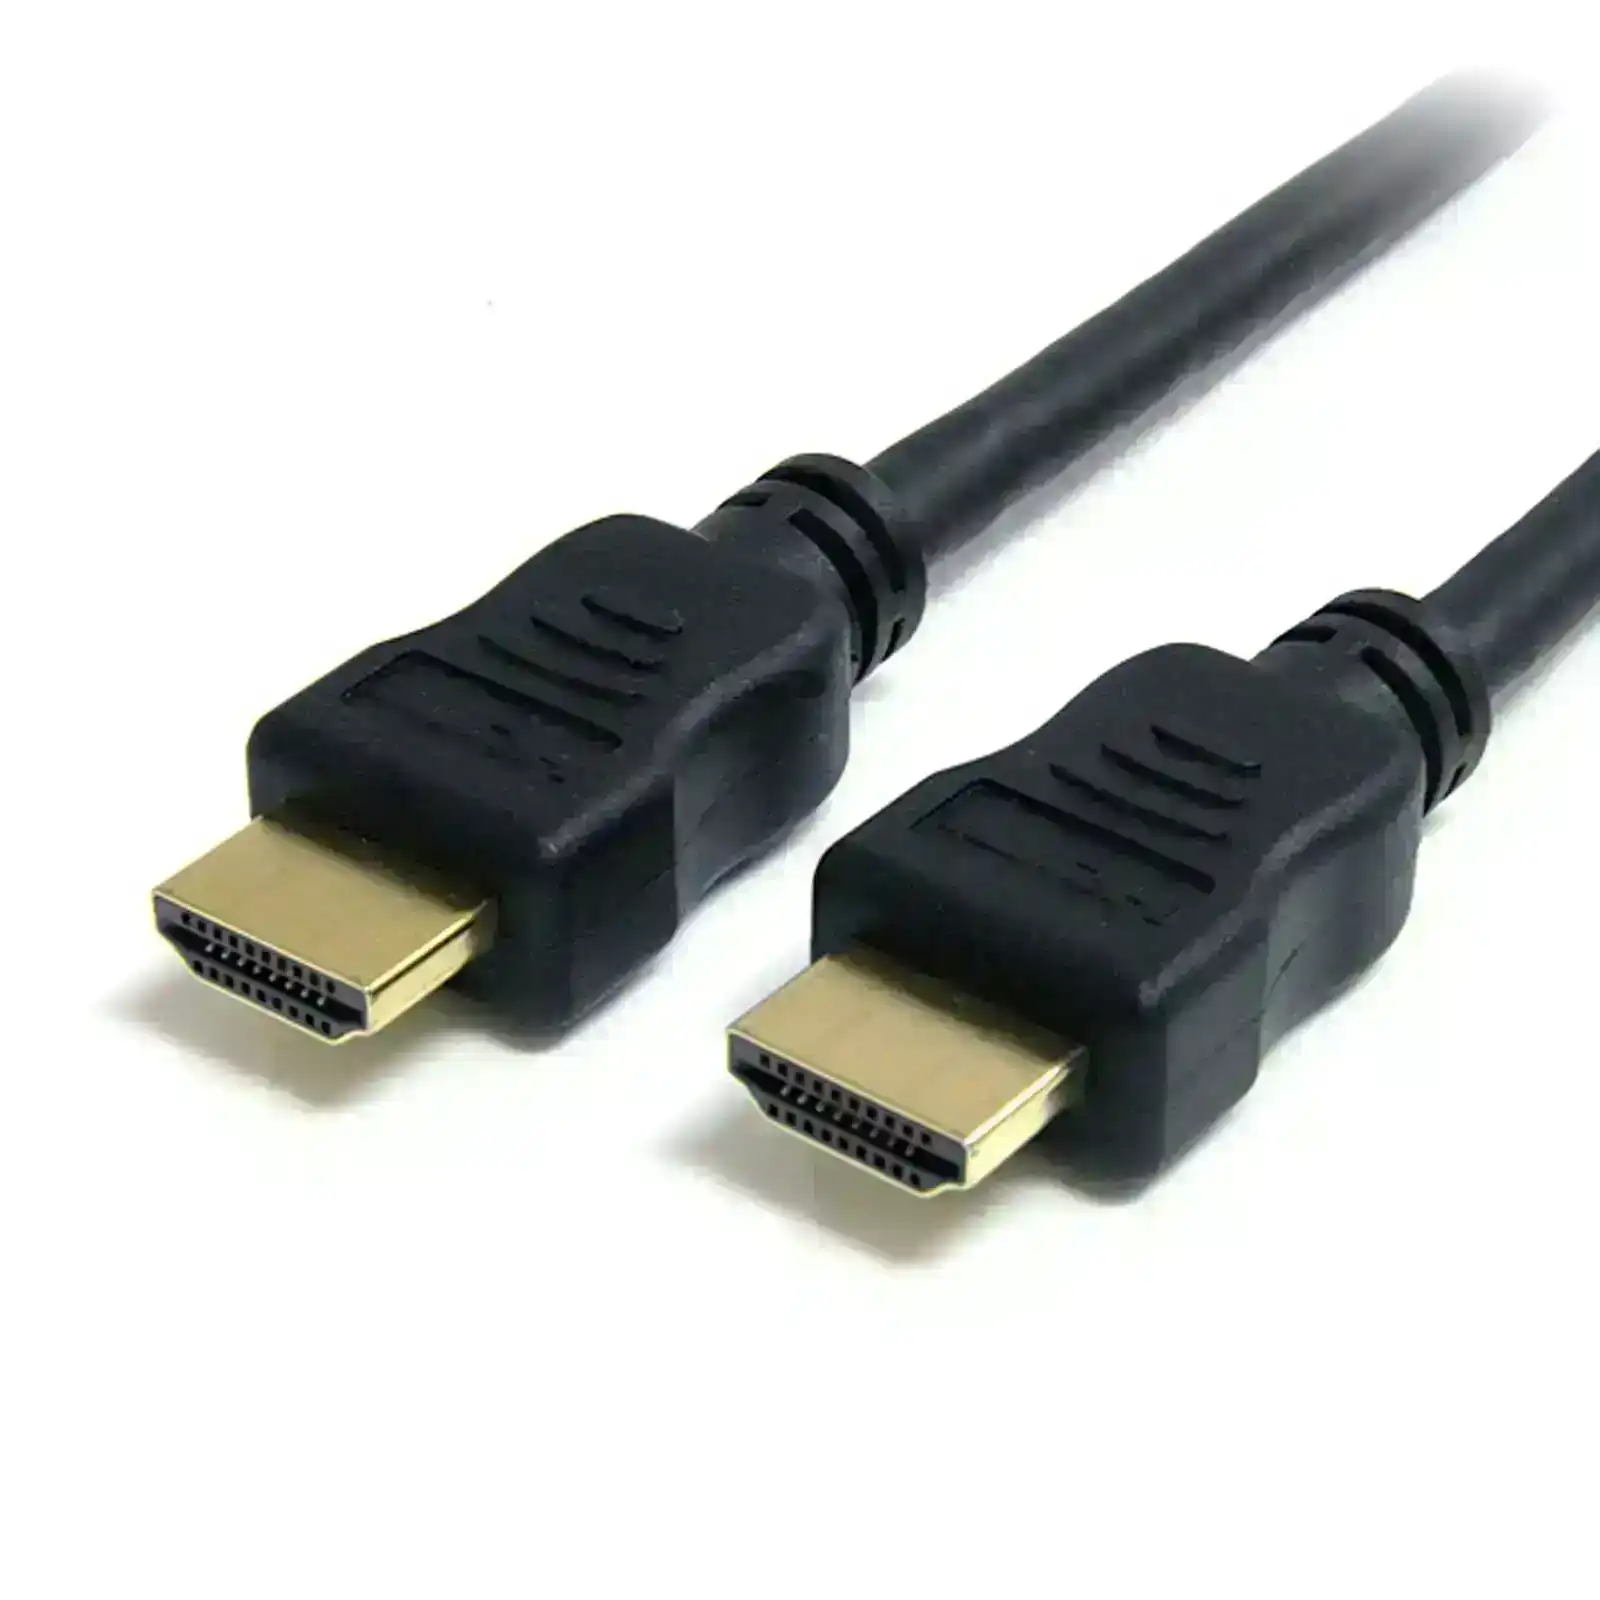 Star Tech 2M 4K/2K UHD Male/Male Gold Plated HDMI Cable w/ Ethernet f/ DVD Black